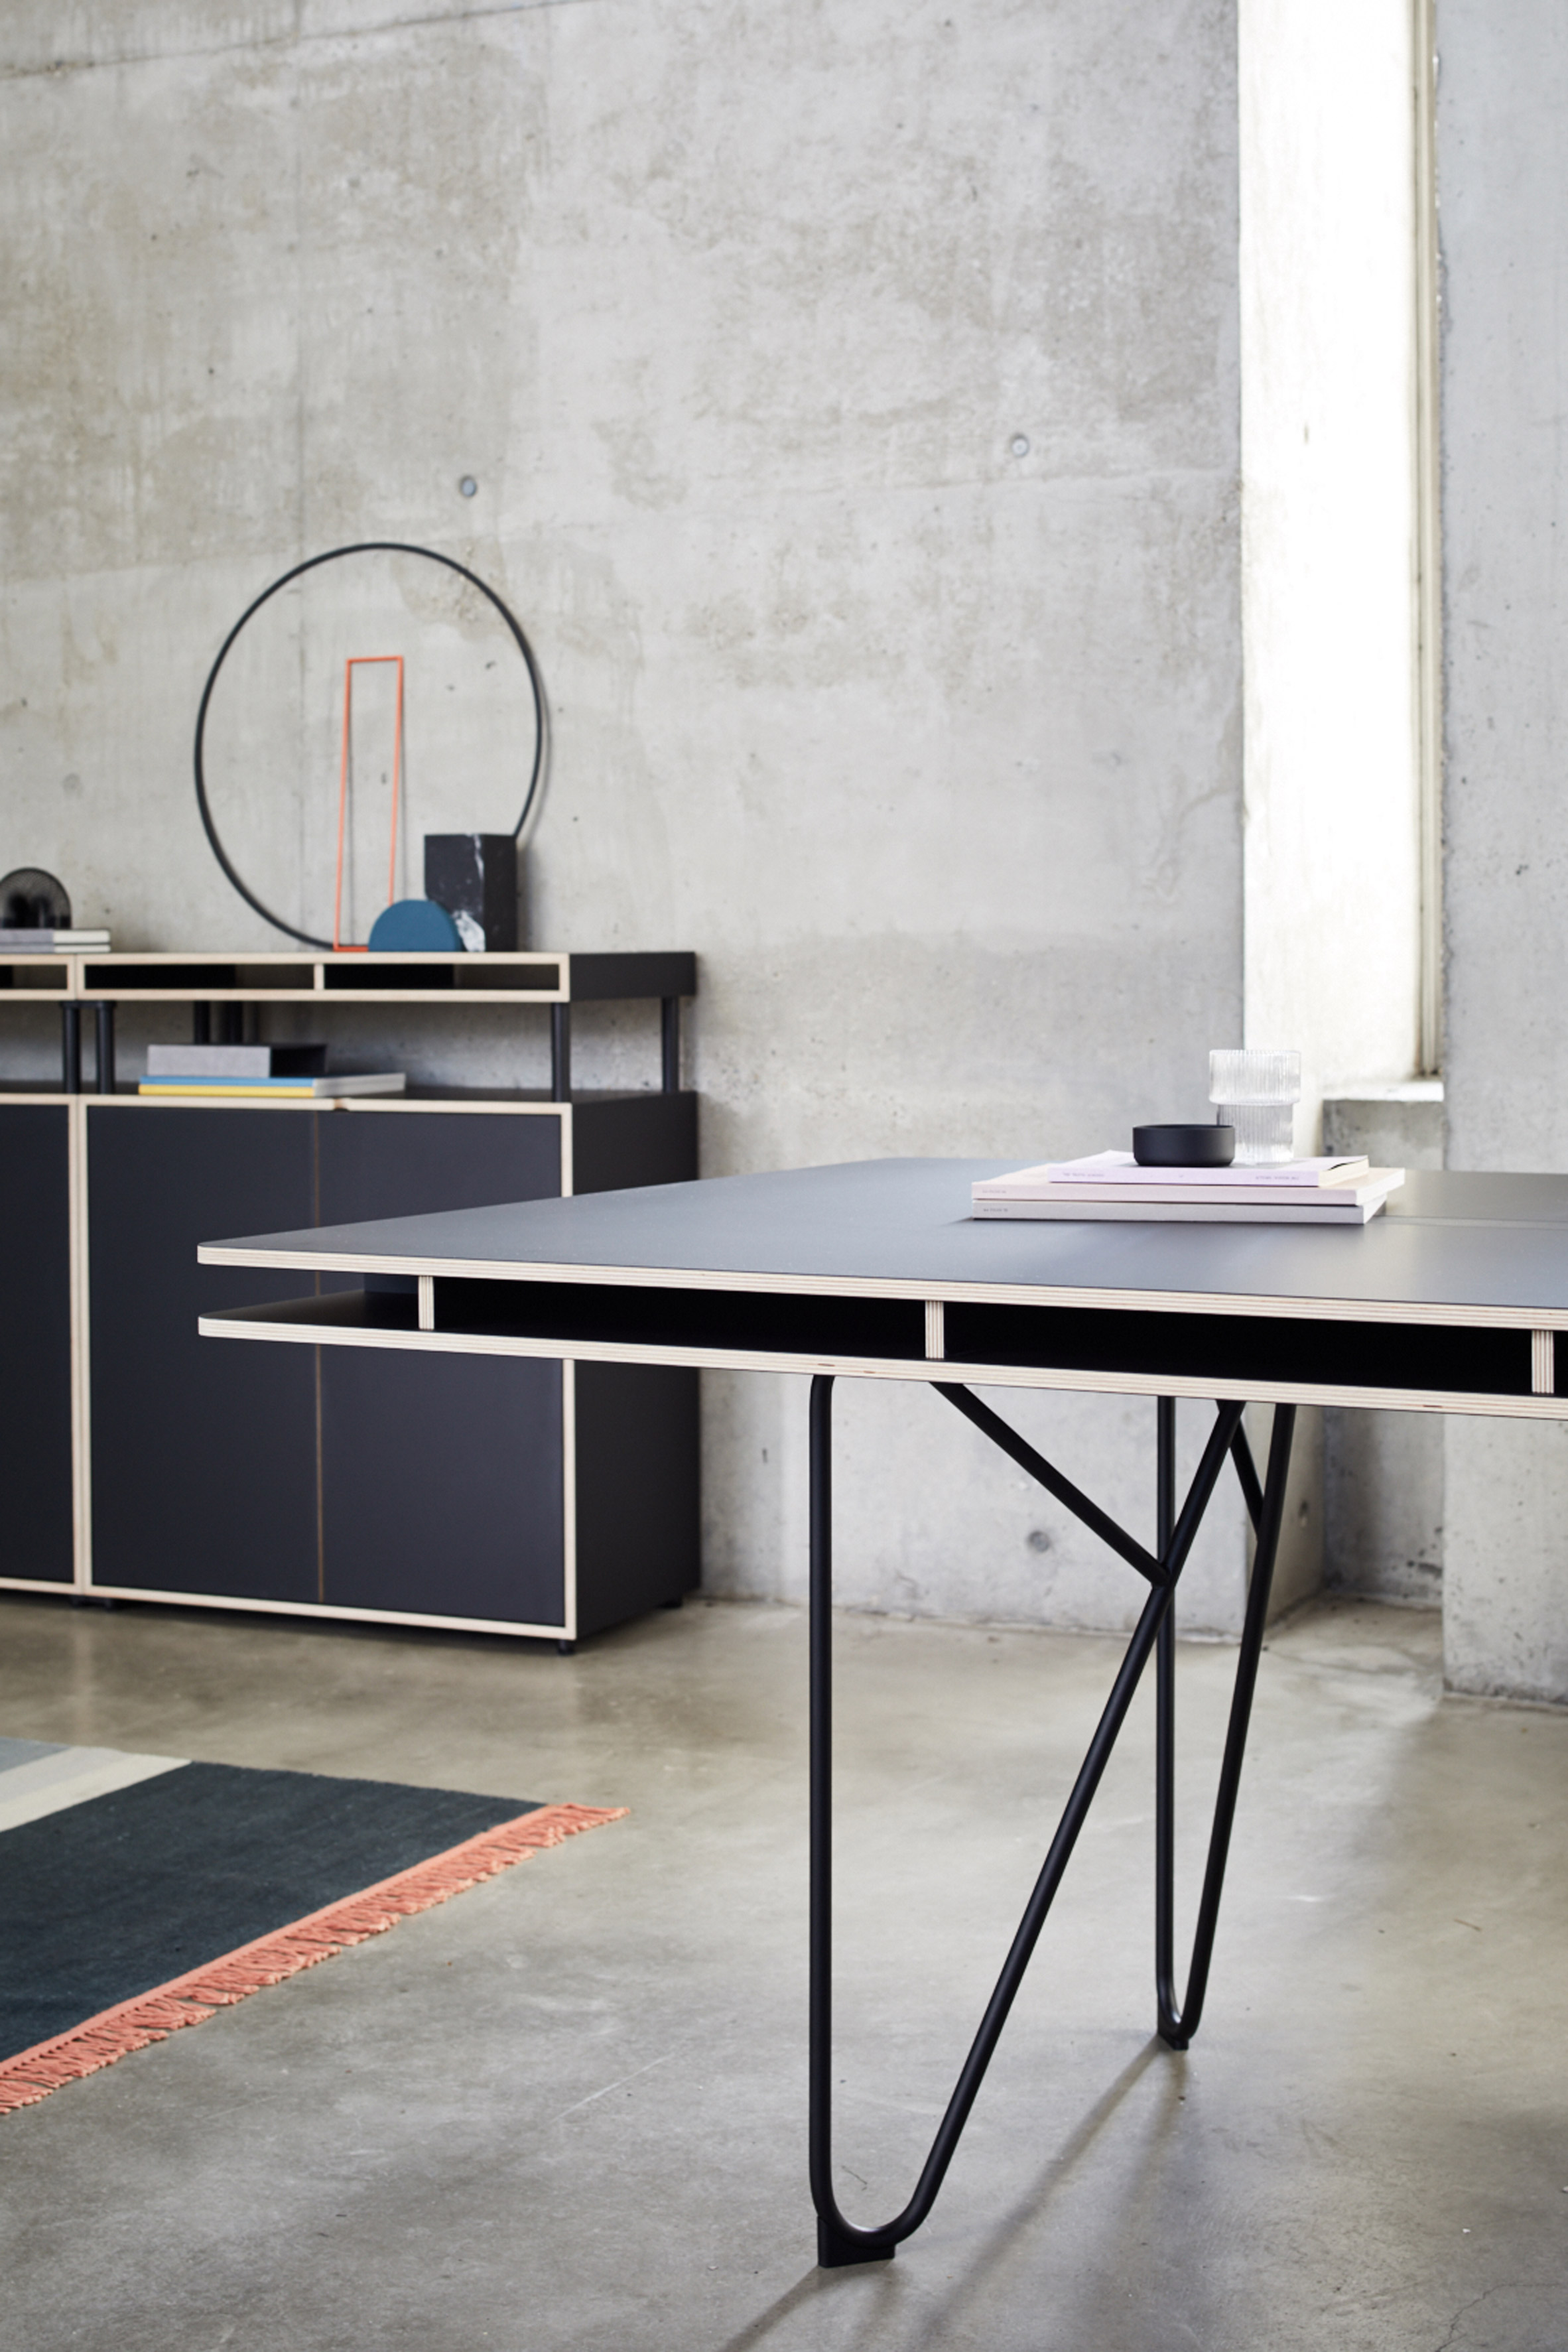 Bene's modular workplace system is designed for freelancers-3